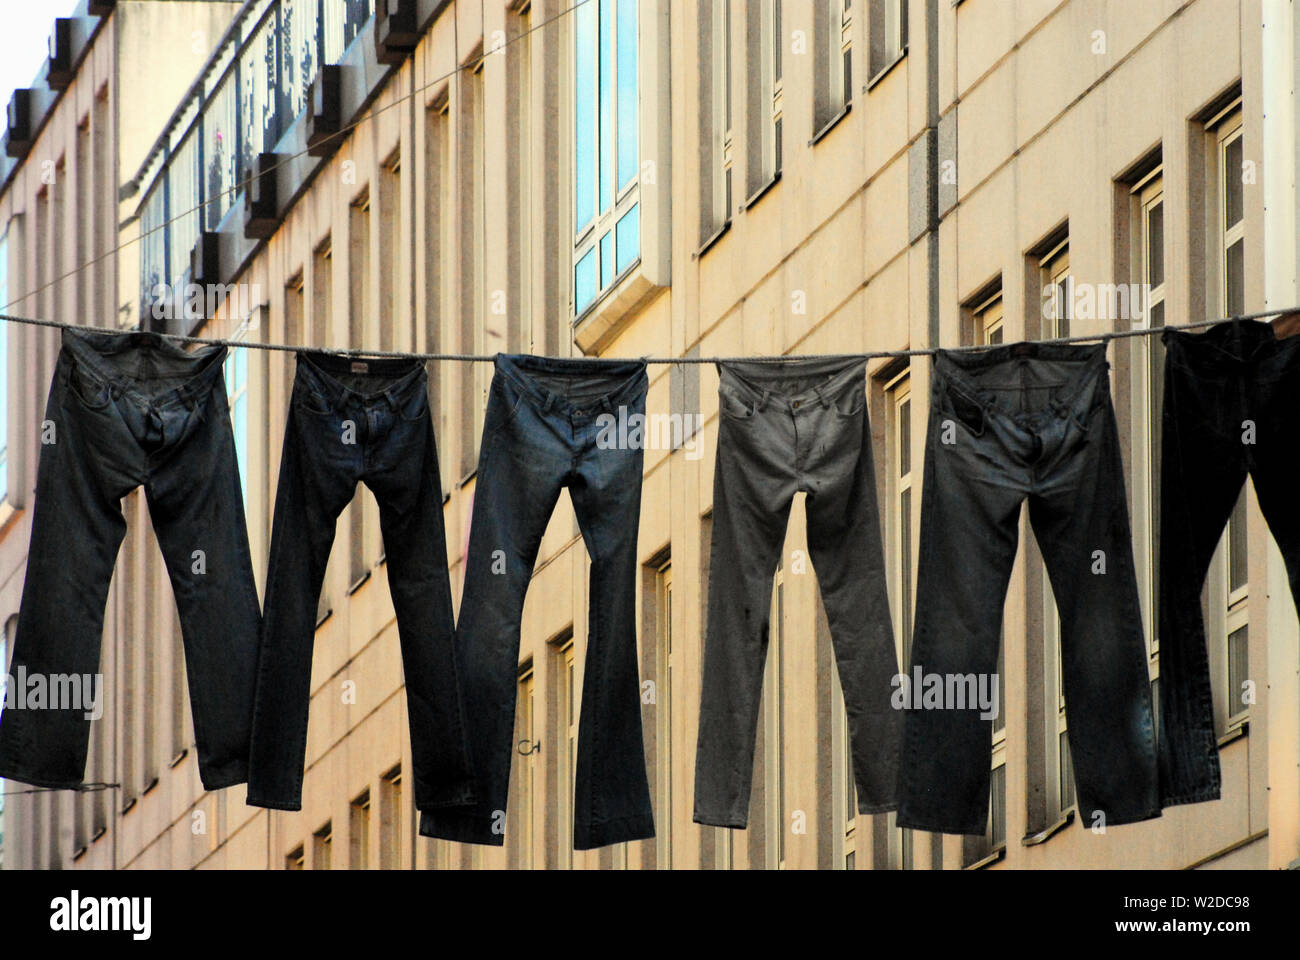 A metaphor for our contemporary lives.  Jeans hanging across a city street in Europe.  Photographed in Sweden. Stock Photo